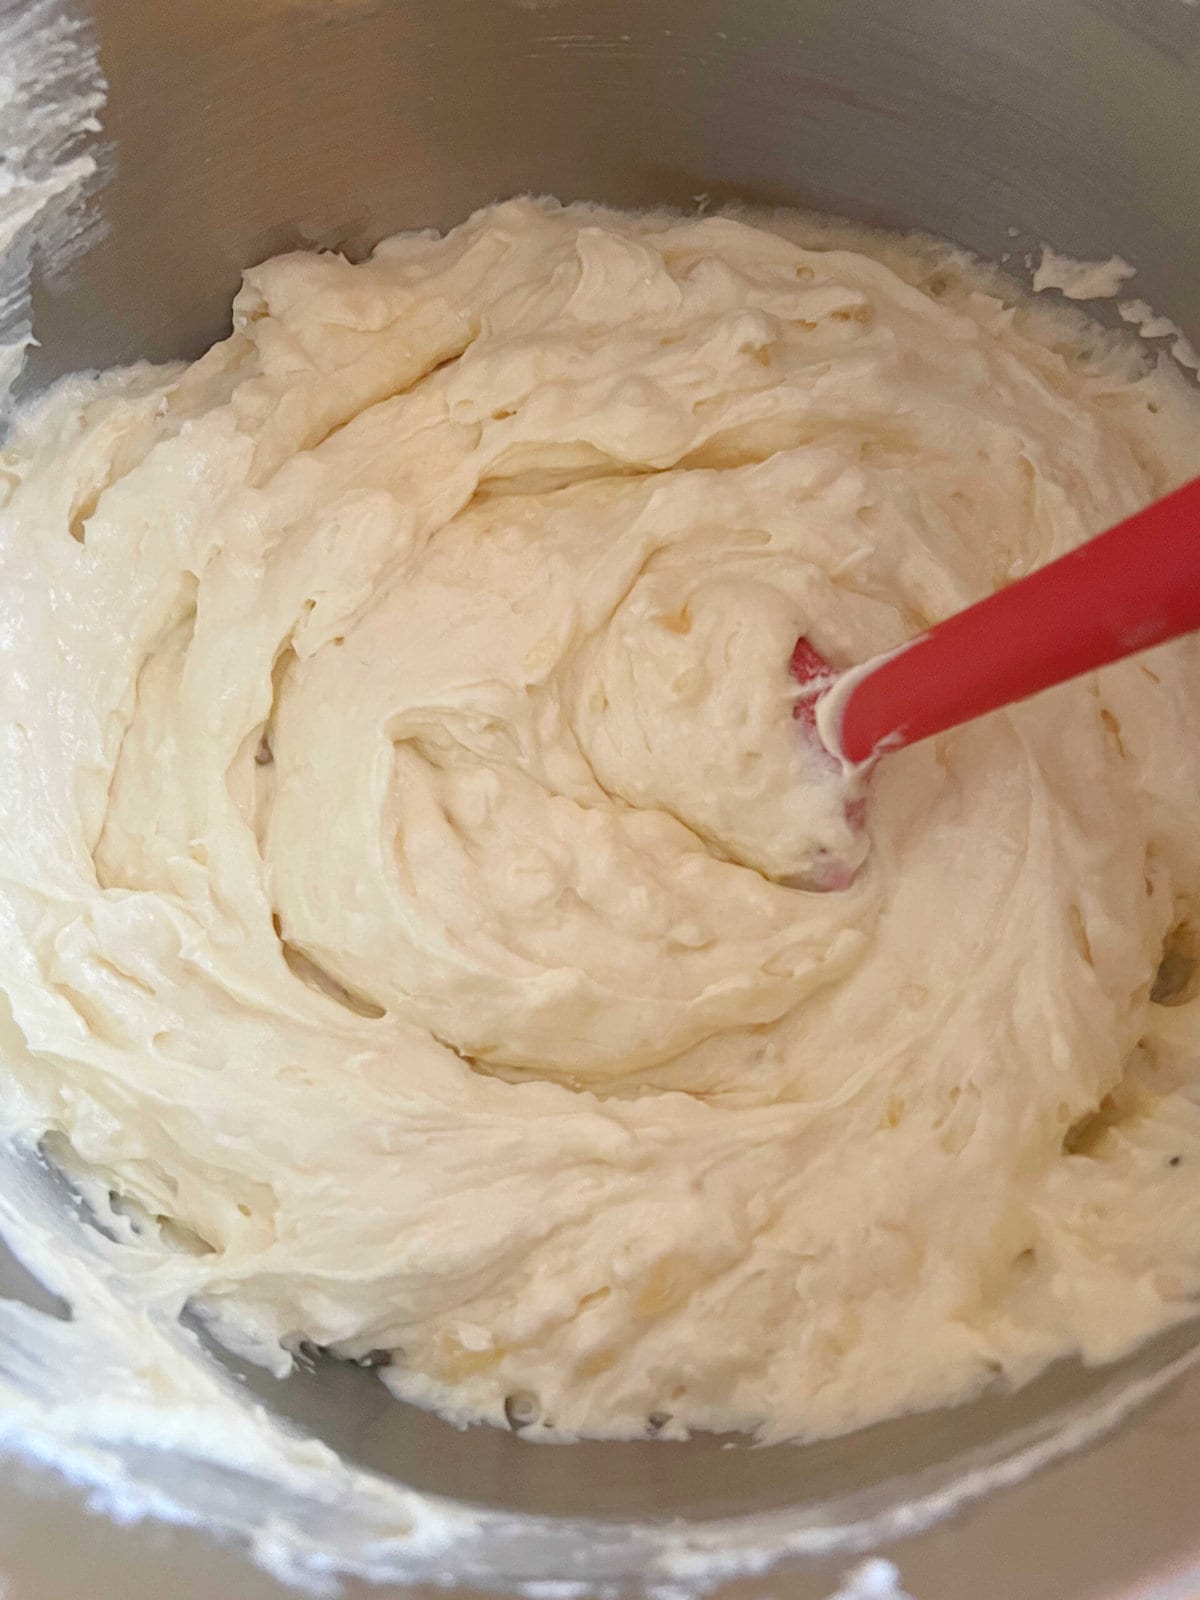 Pineapple coconut cake batter in a mixing bowl.